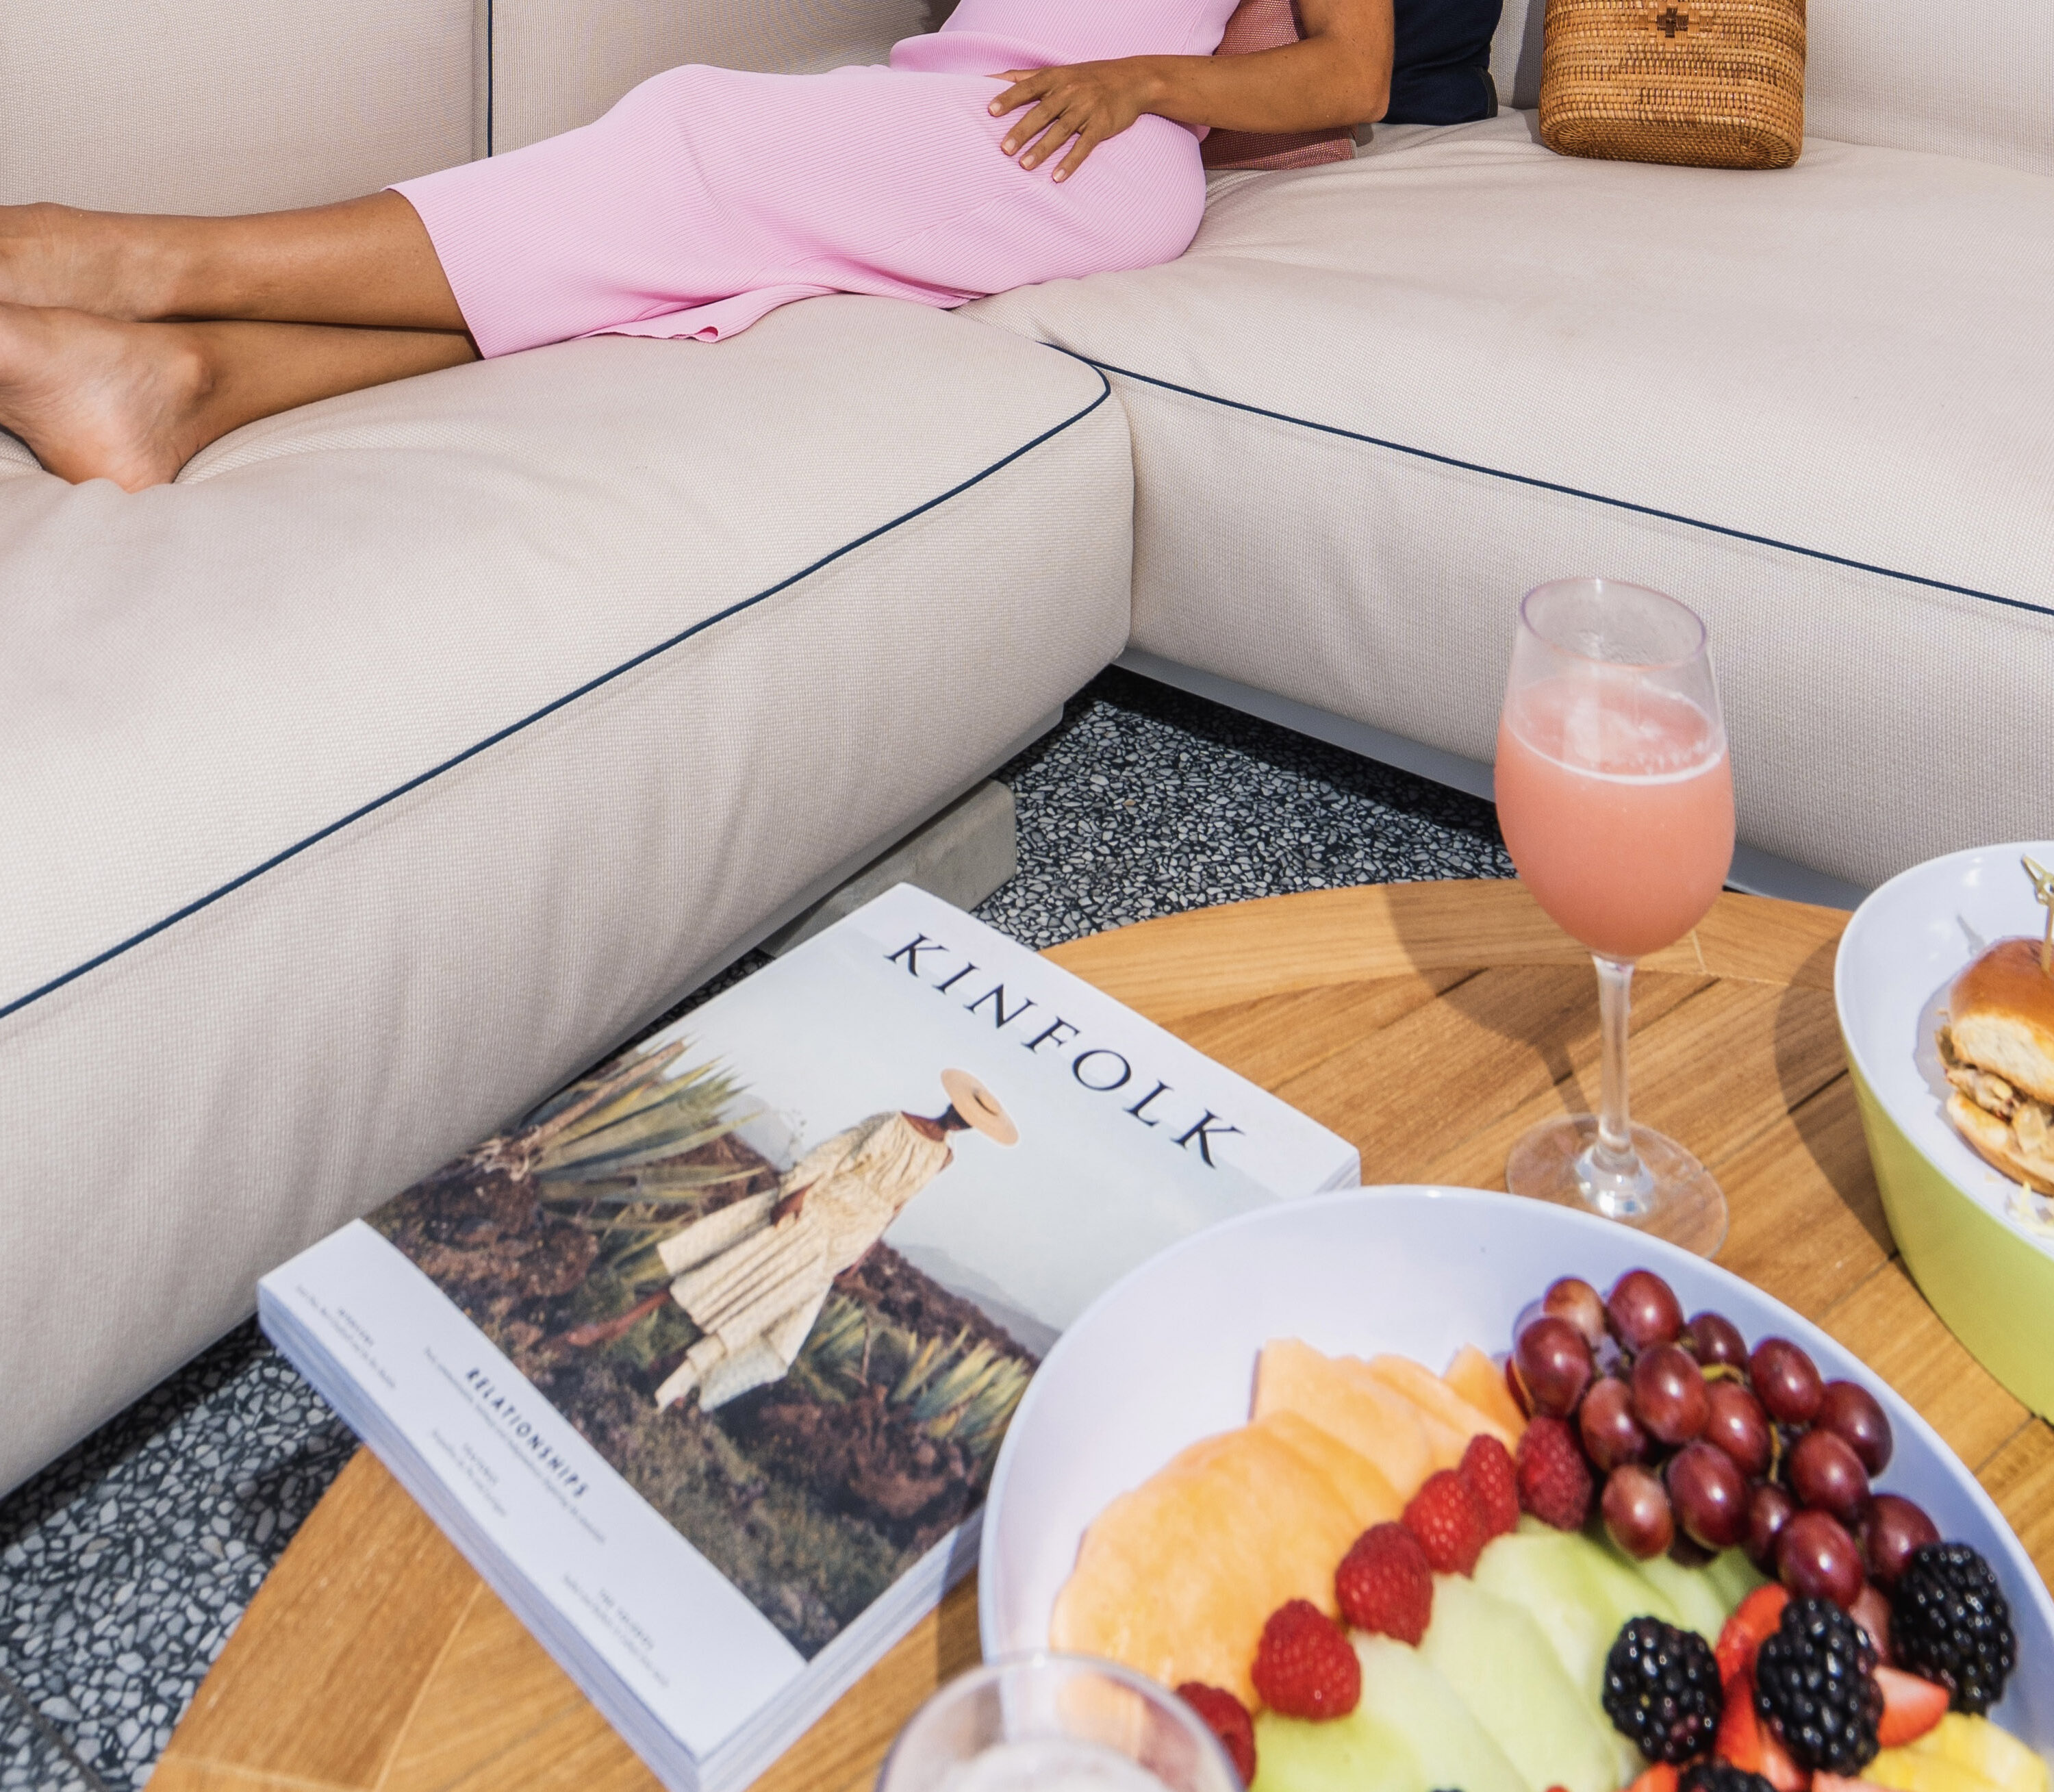 external shot of woman in cabana reclining with fruit and magazine on the table